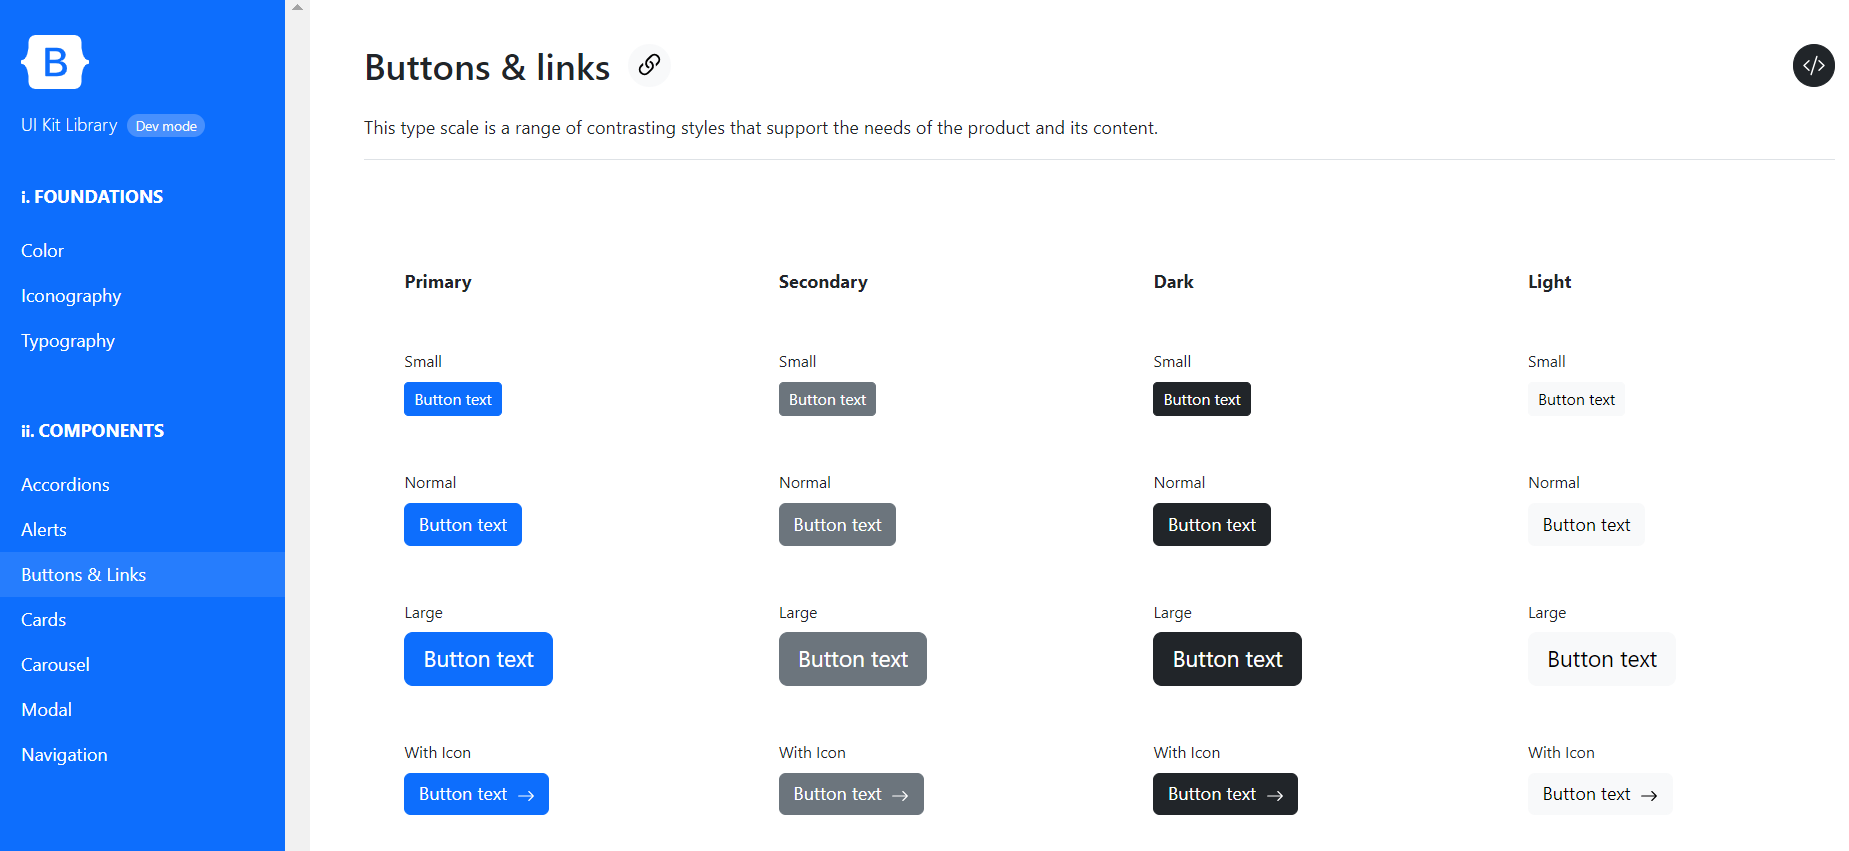 Buttons & links in the Bootstrap UI Kit